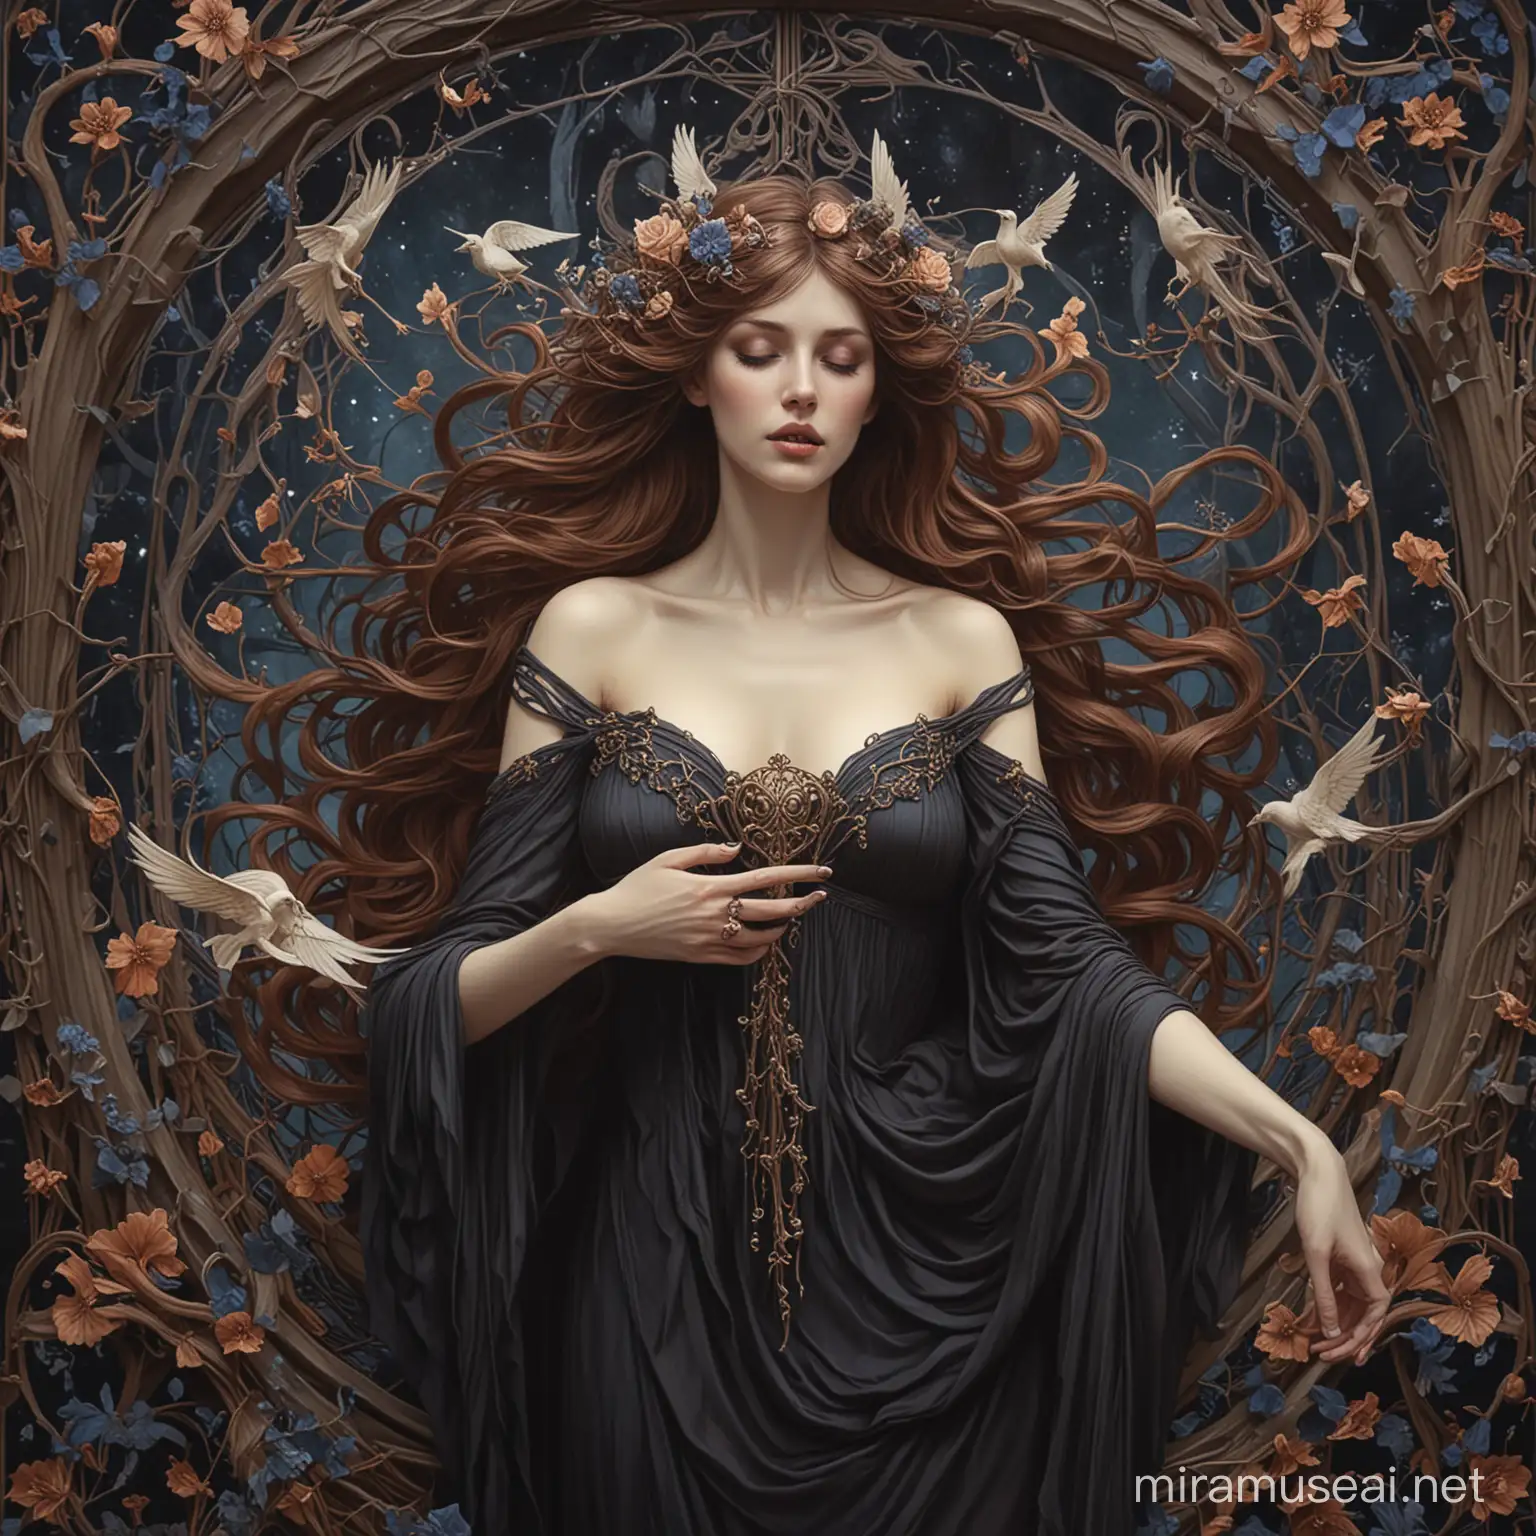 Dark Magical World Art Nouveau Depiction of the Death of a Muse